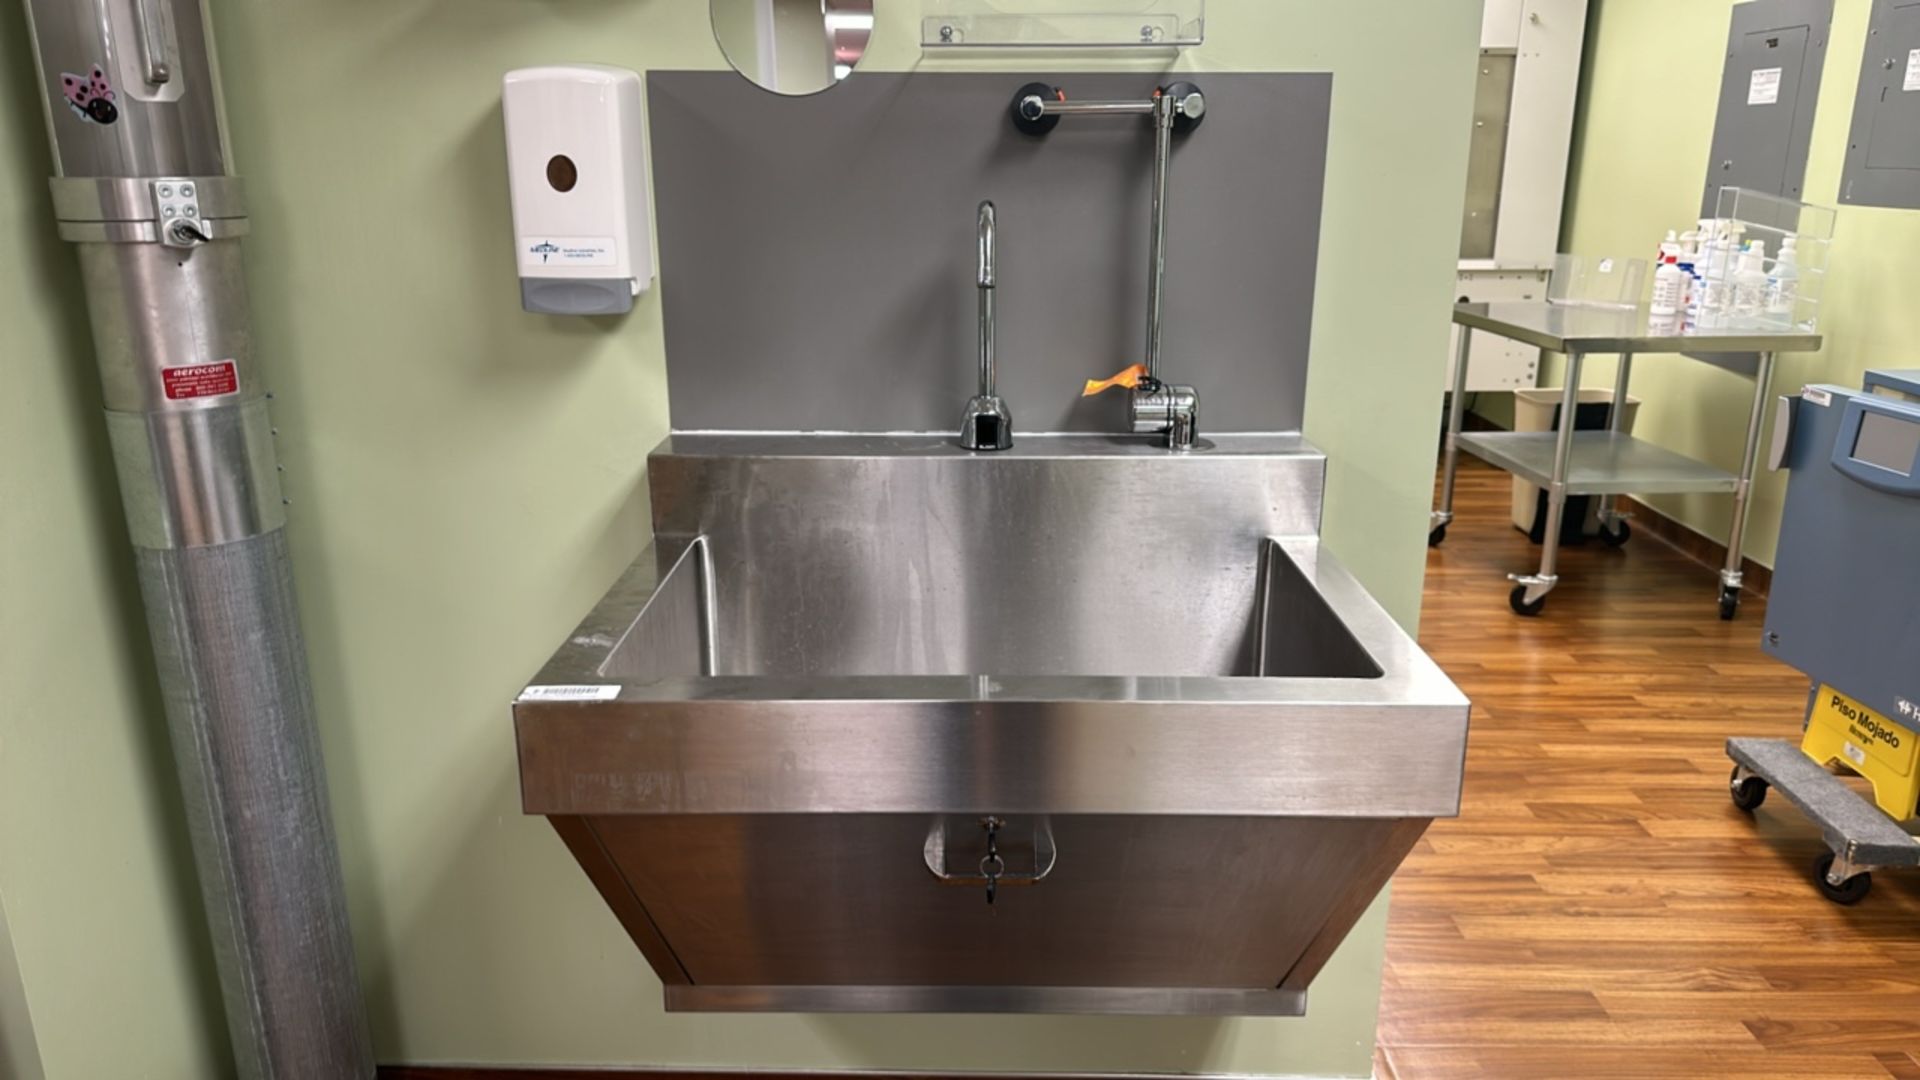 STAINLESS STEEL TOUCHLESS SINK WITH EYE WASH